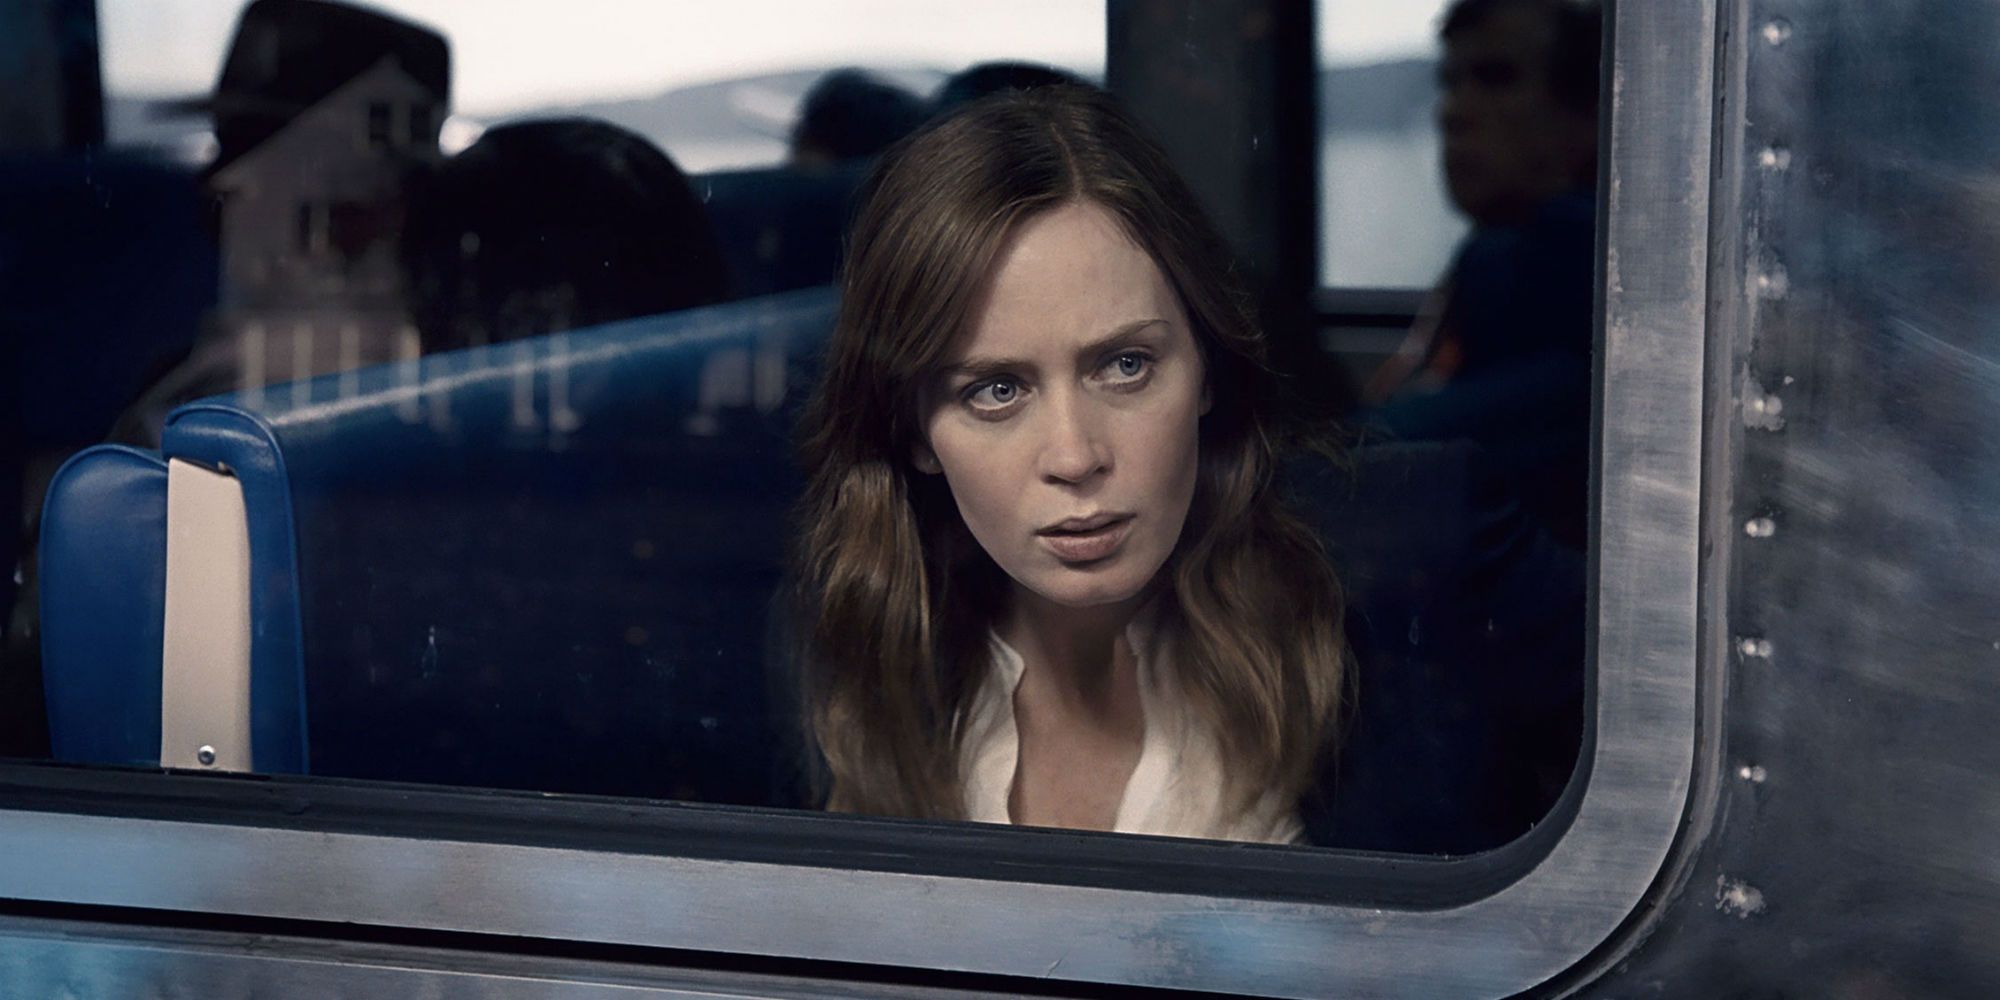 Movie Photo from The Girl On The Train featuring Emily Blunt staring off from the train